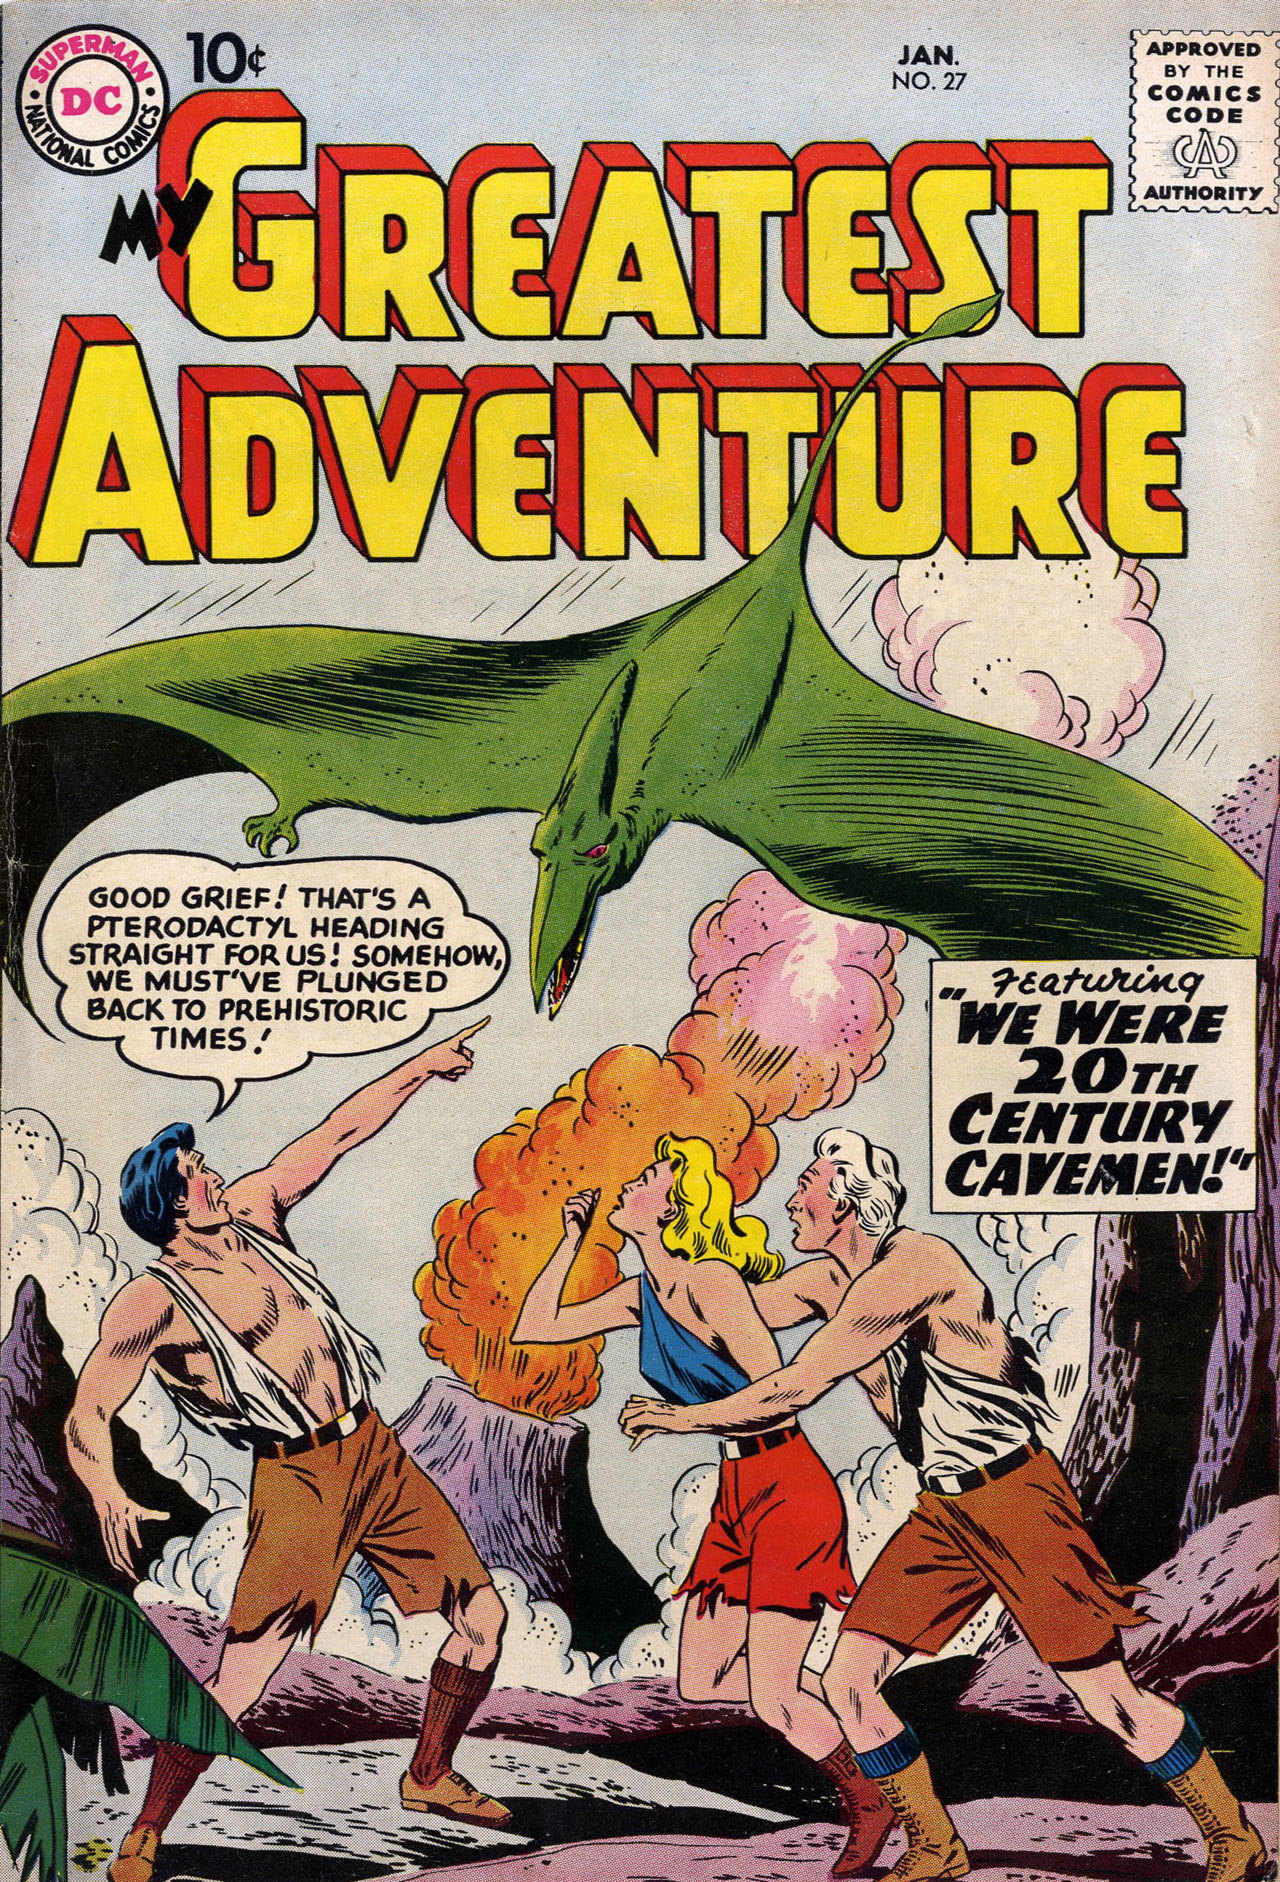 My Greatest Adventure (1955) issue 27 - Page 1